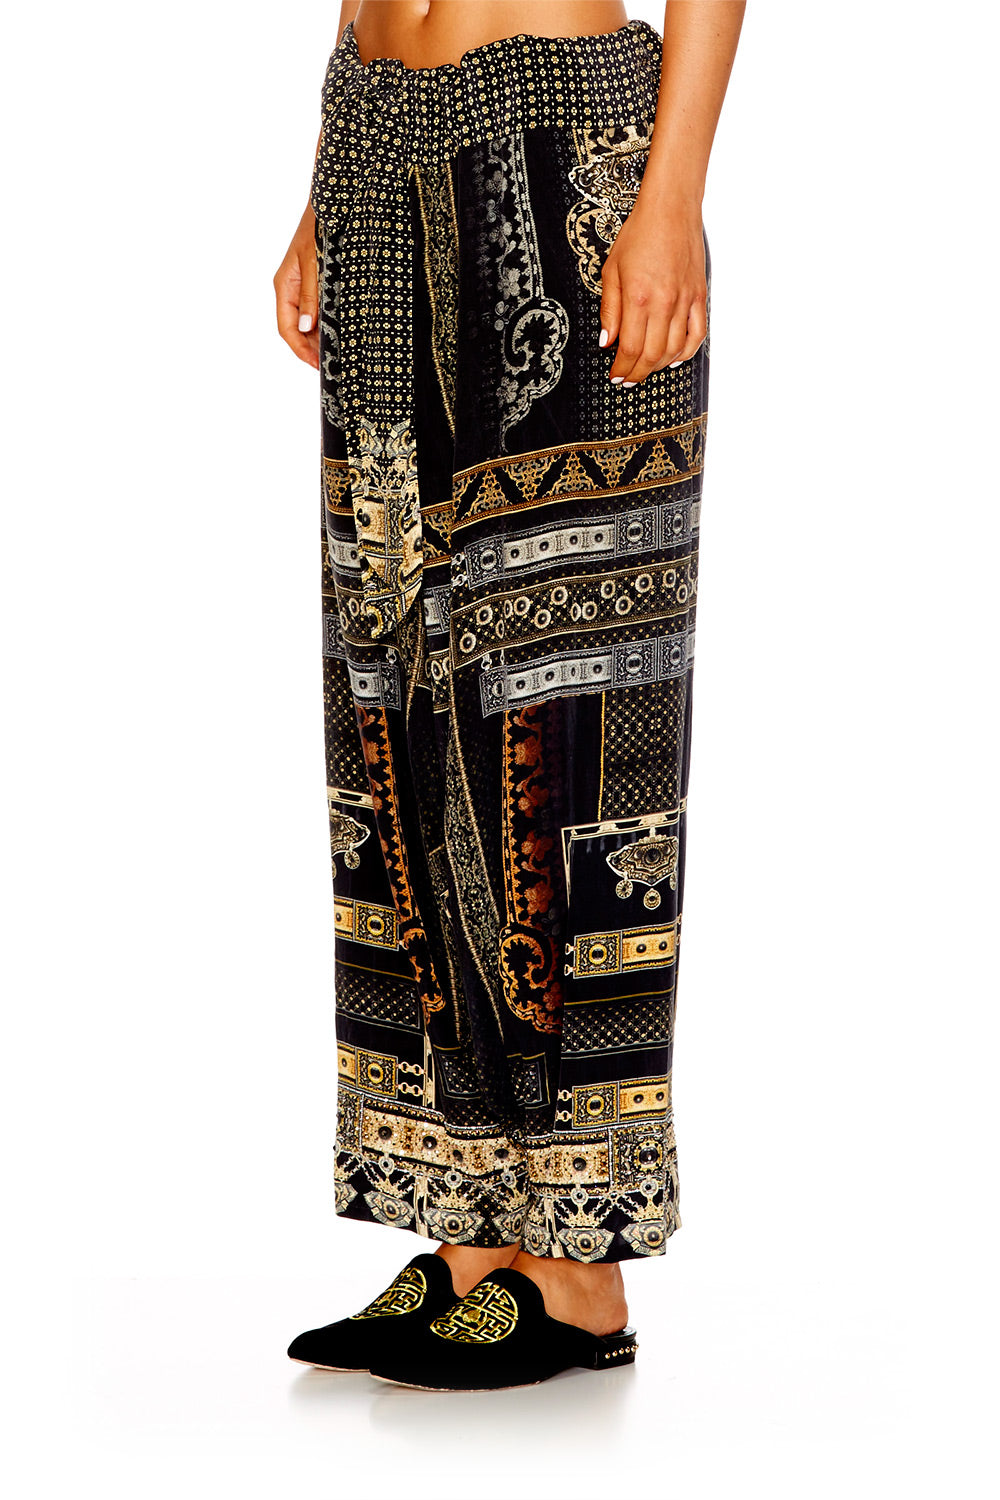 FOR THE LOVE OF LHASA HAREM PANTS